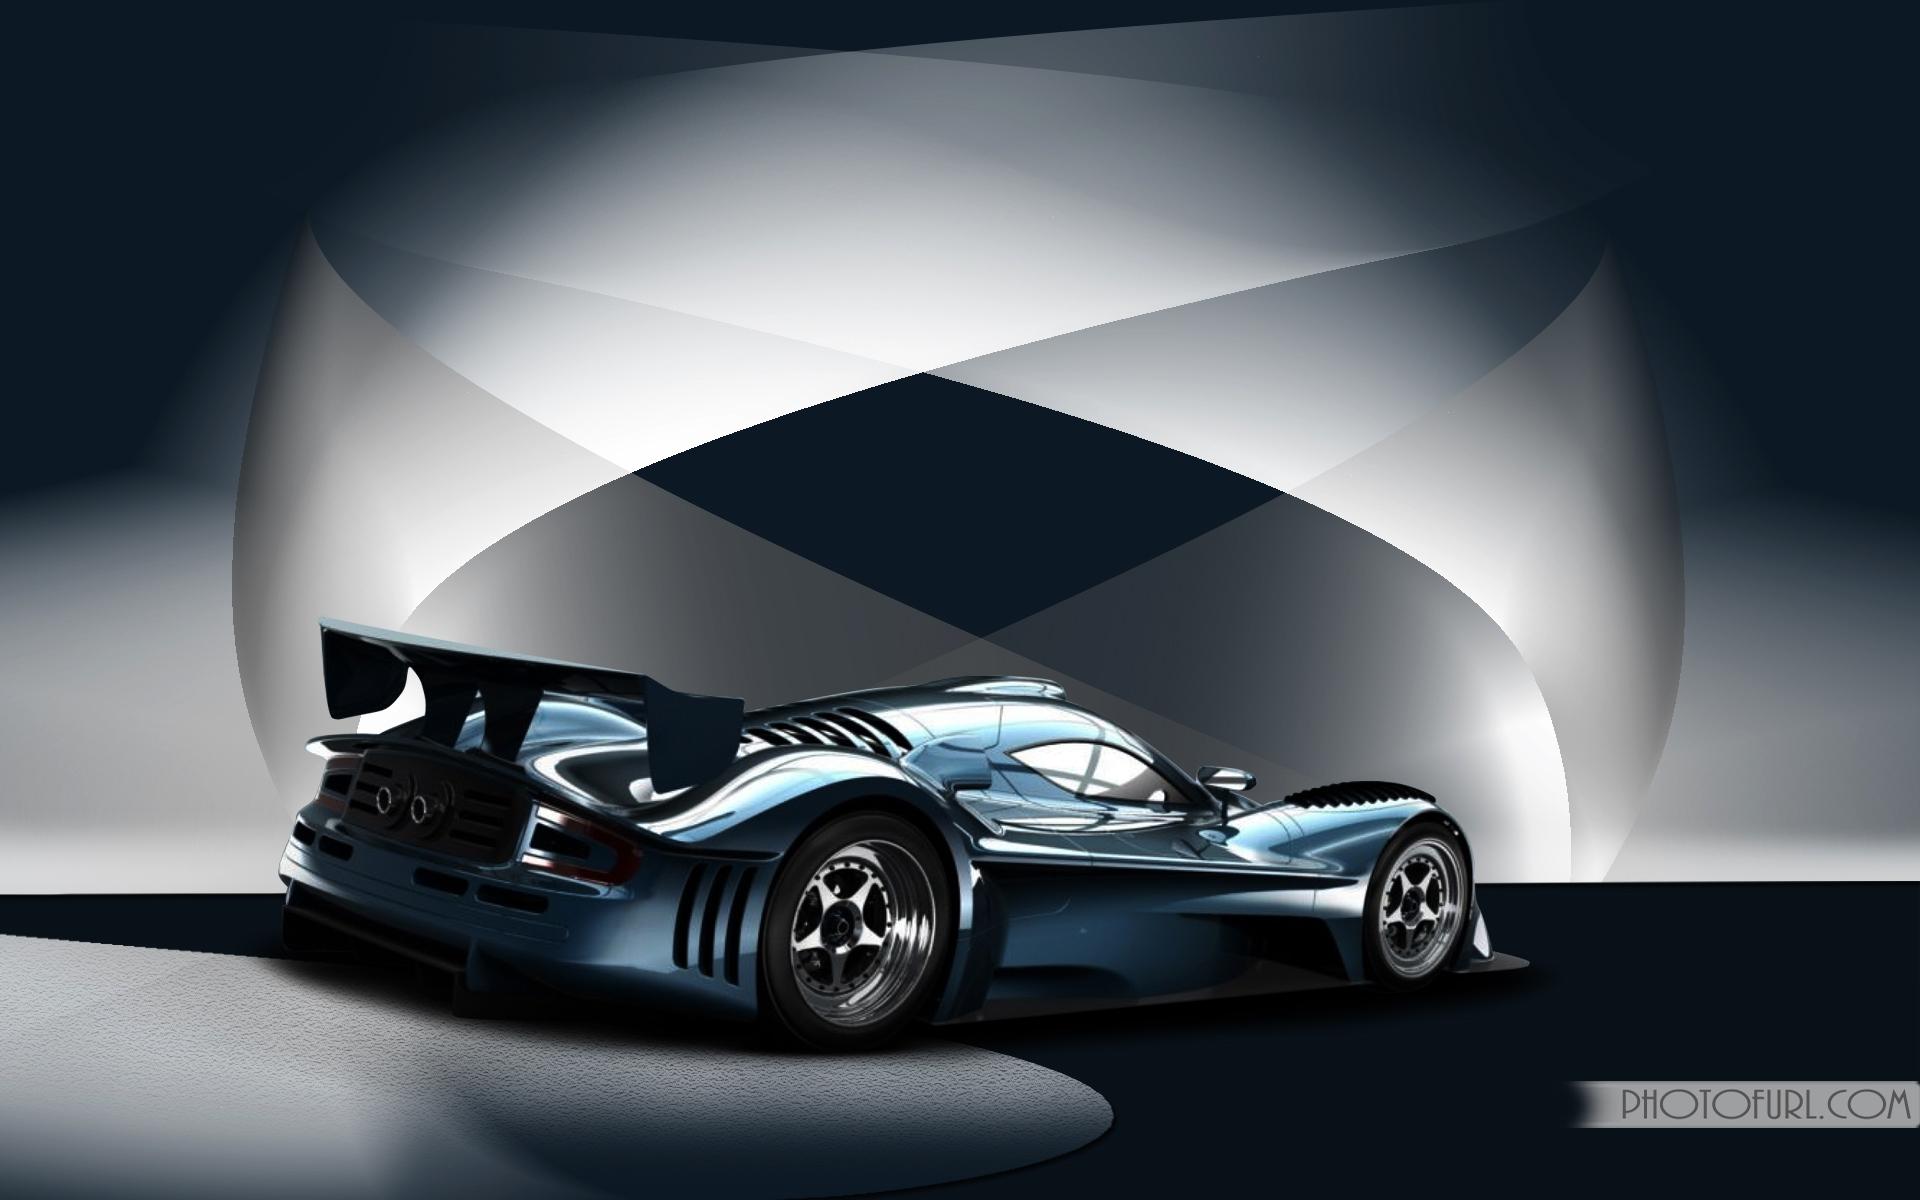 Animated - Fb Car , HD Wallpaper & Backgrounds